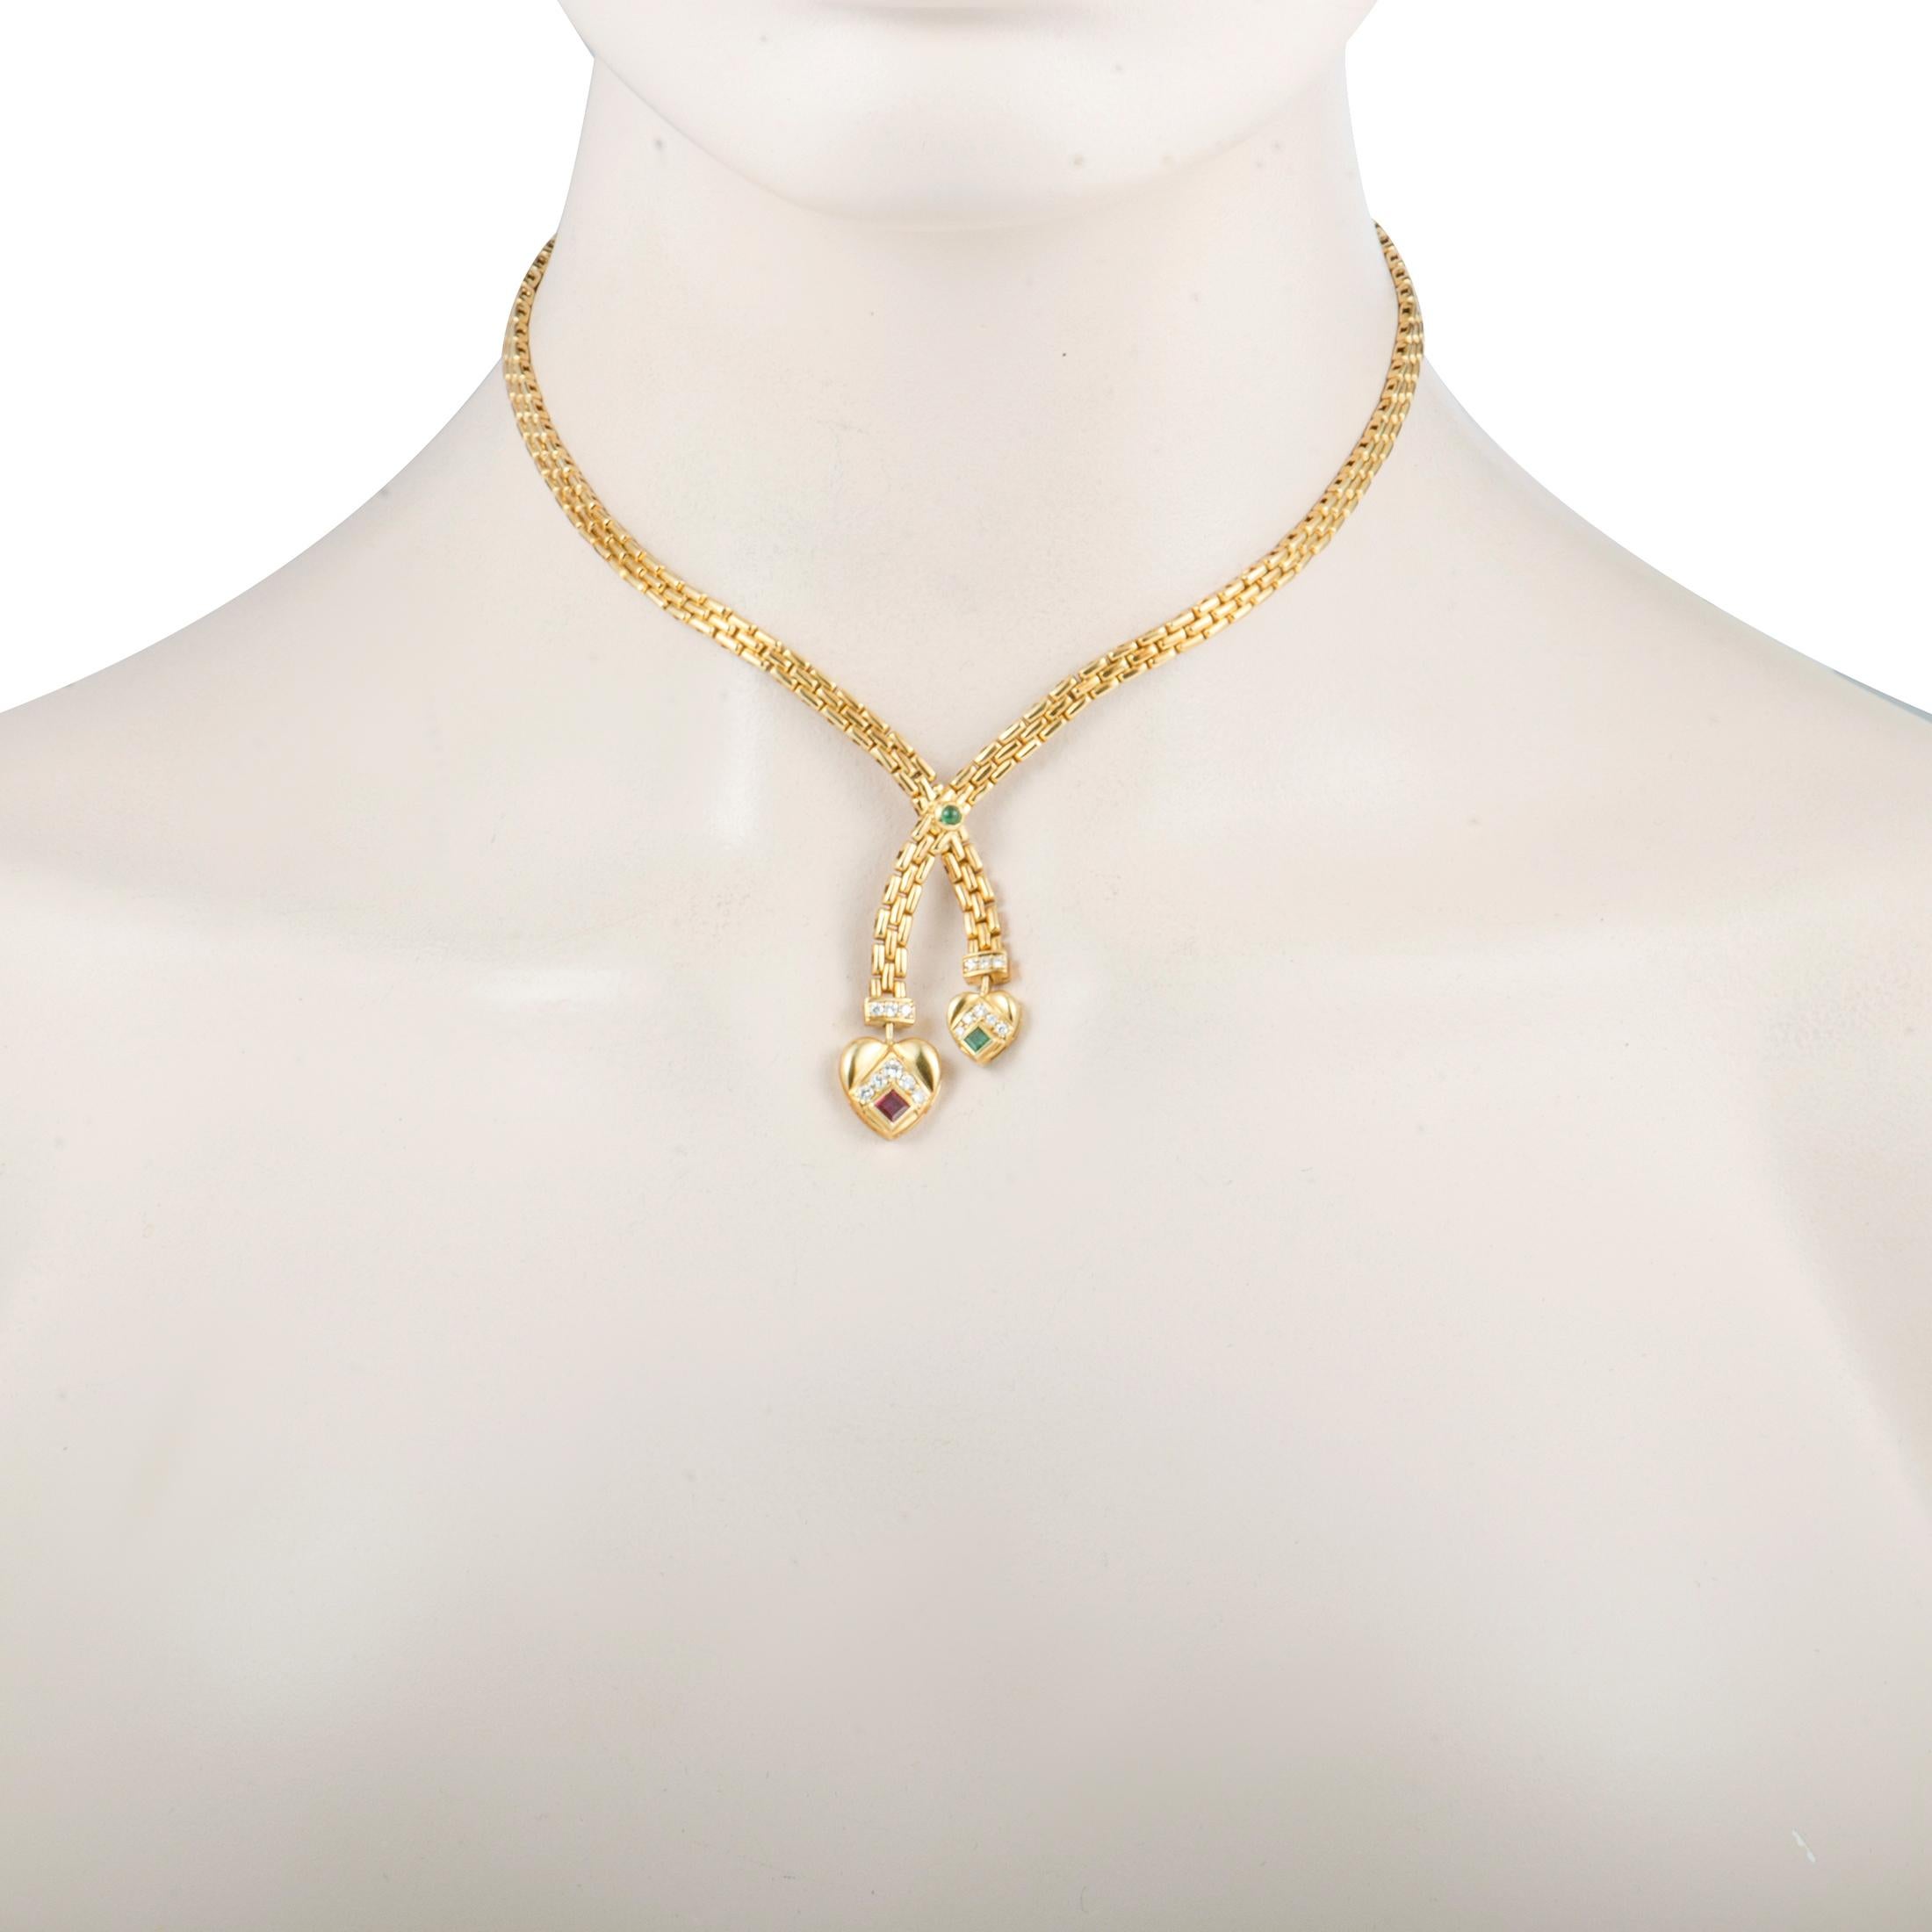 This exquisitely vintage necklace by Cartier emanates utmost elegance through its remarkably unique design. The beautiful necklace is crafted from classy 18K yellow gold and embellished with captivating rubies, alluring emeralds, and glamorous